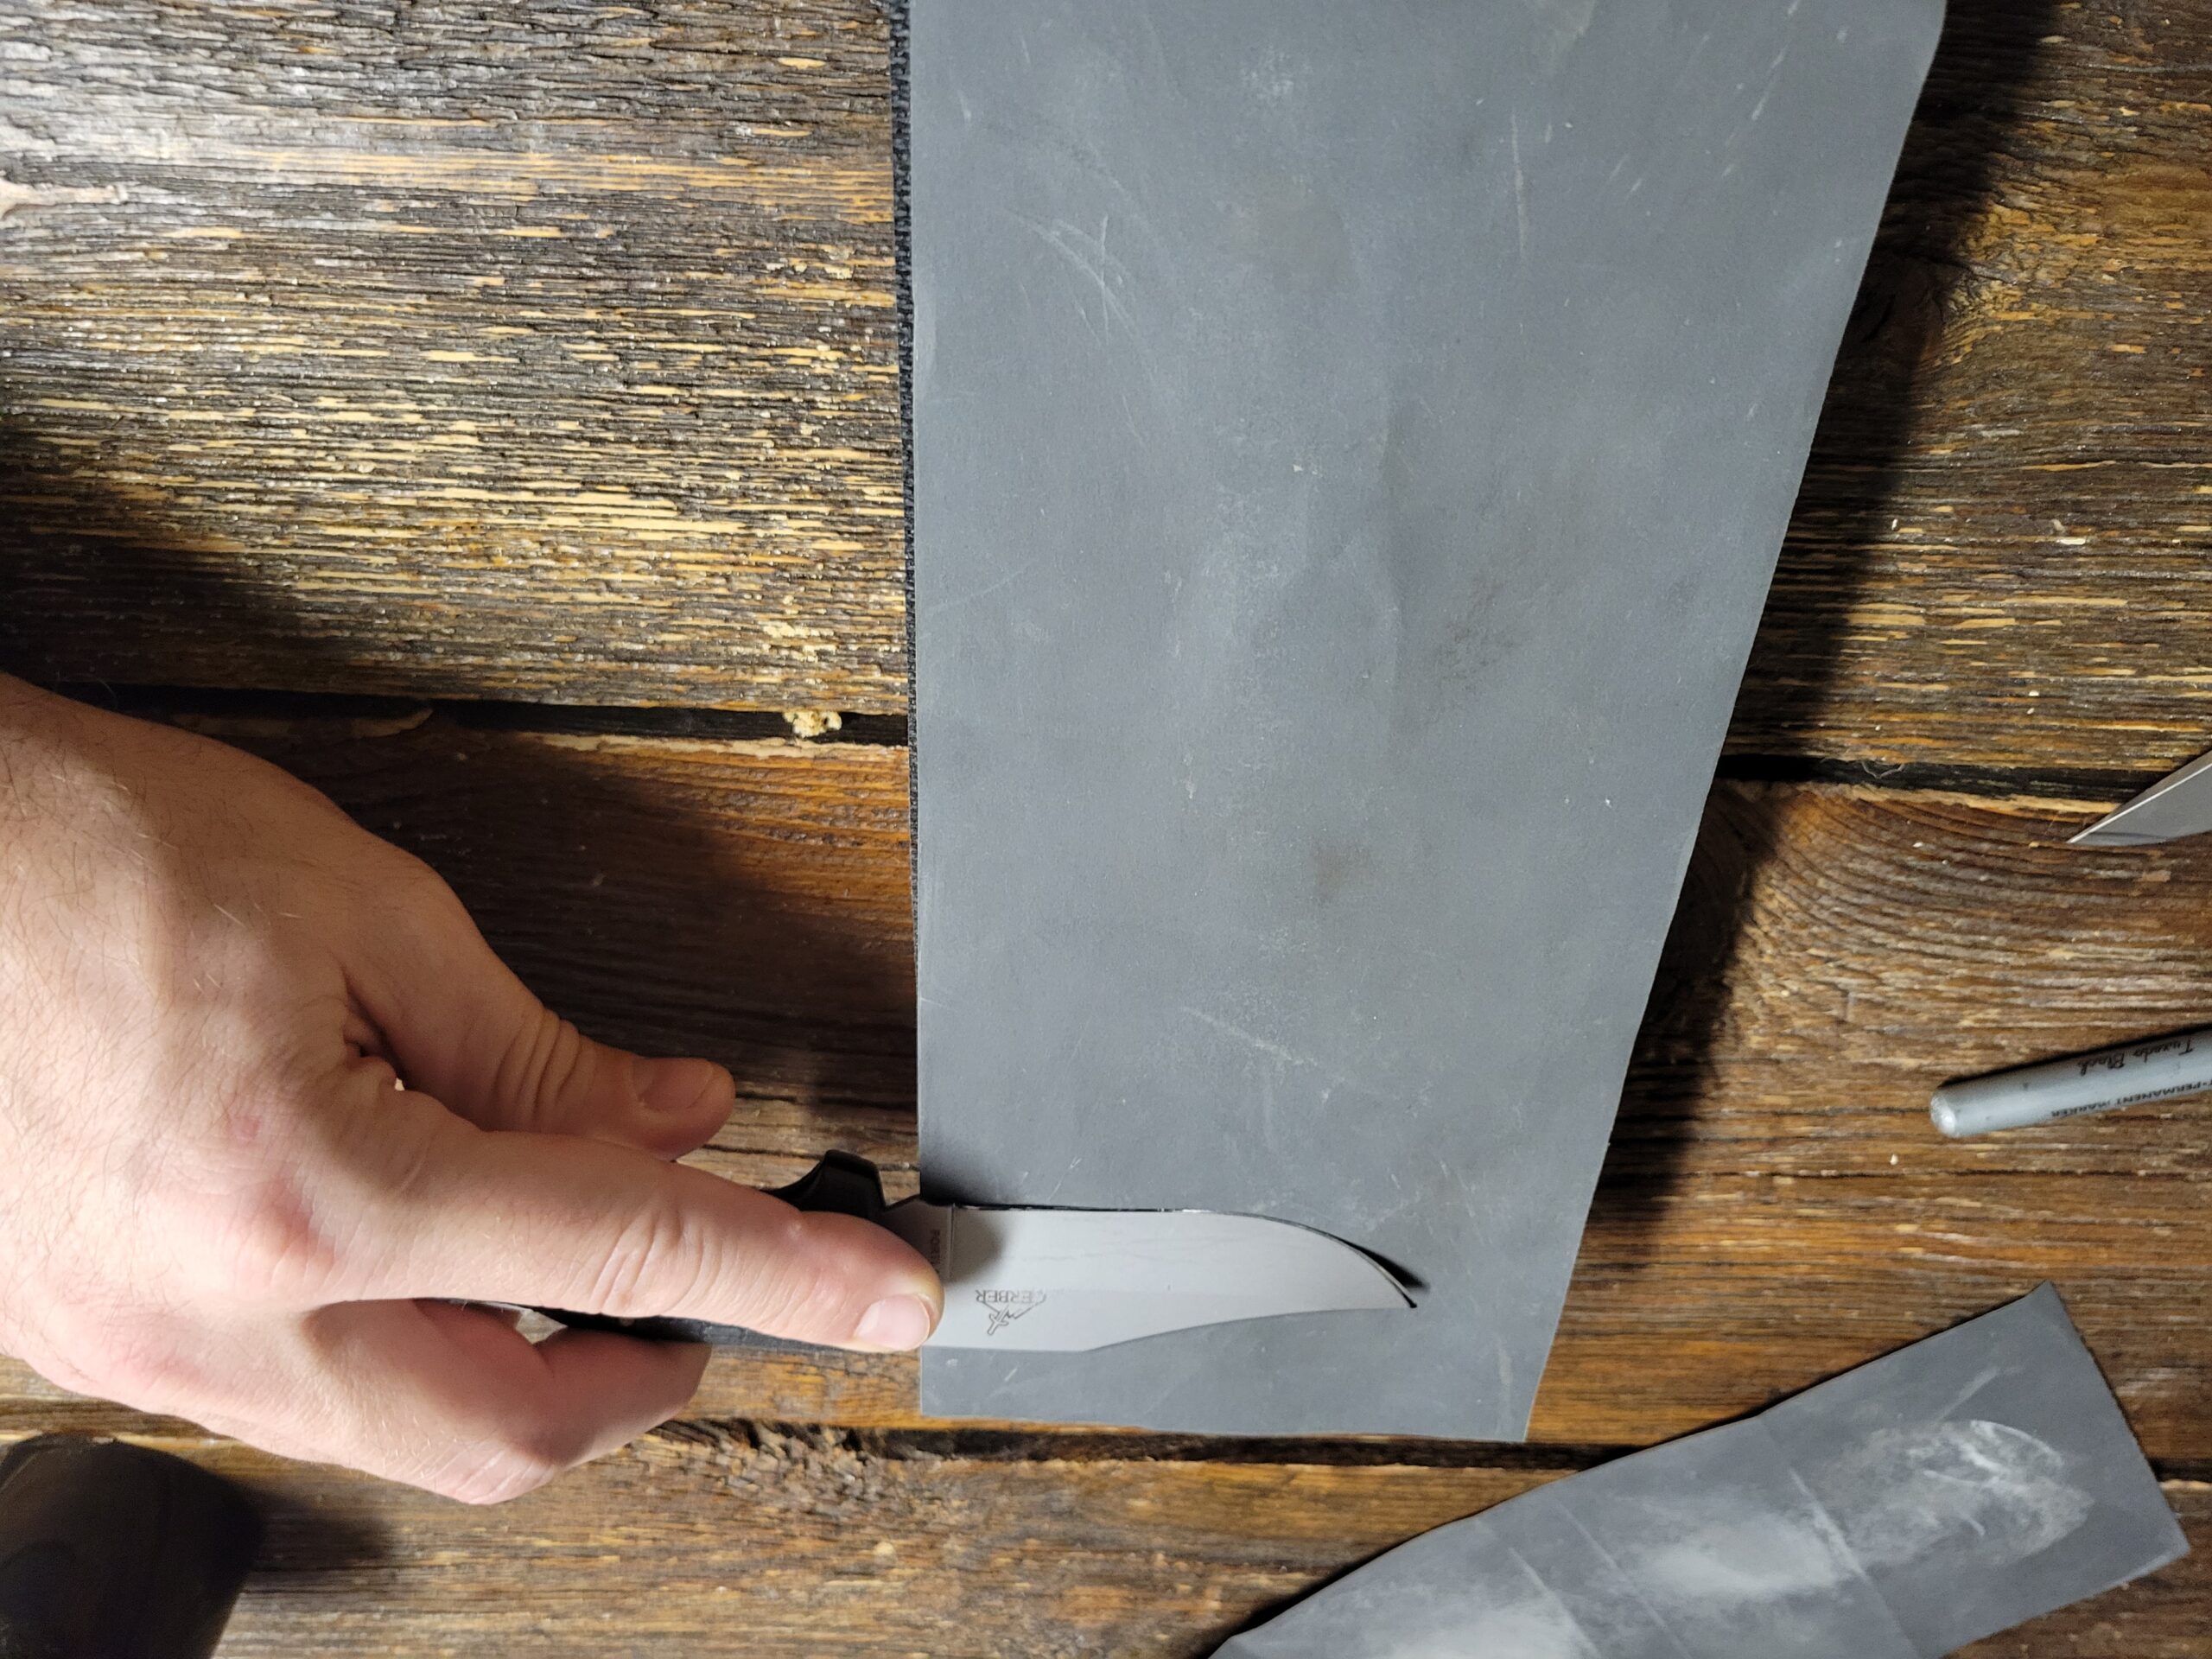 How to Use a Whetstone and Honing Steel to Keep Your Knives Supersharp